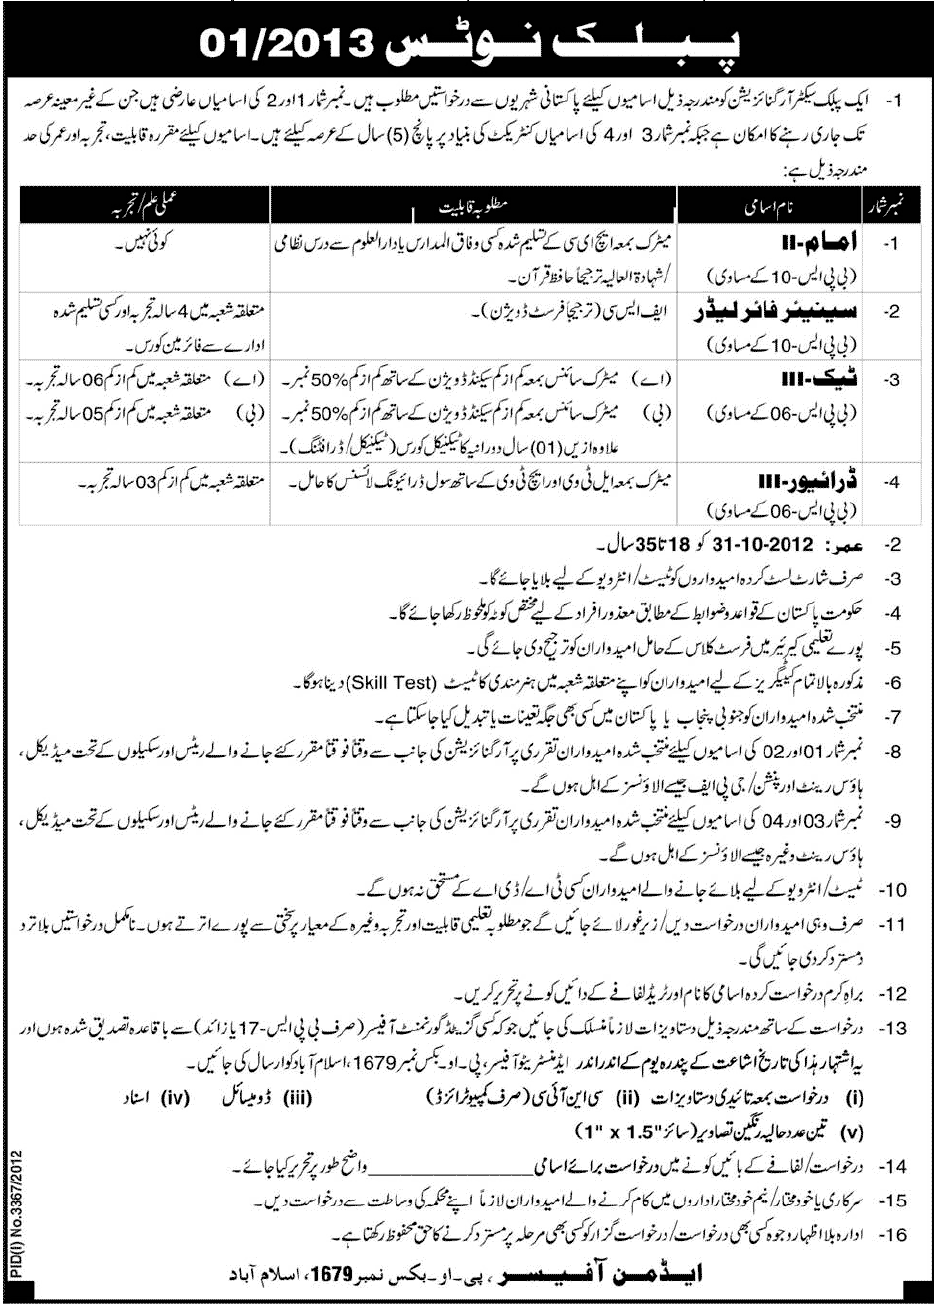 Government Jobs 2013 Advertisement in Daily Jang Newspaper